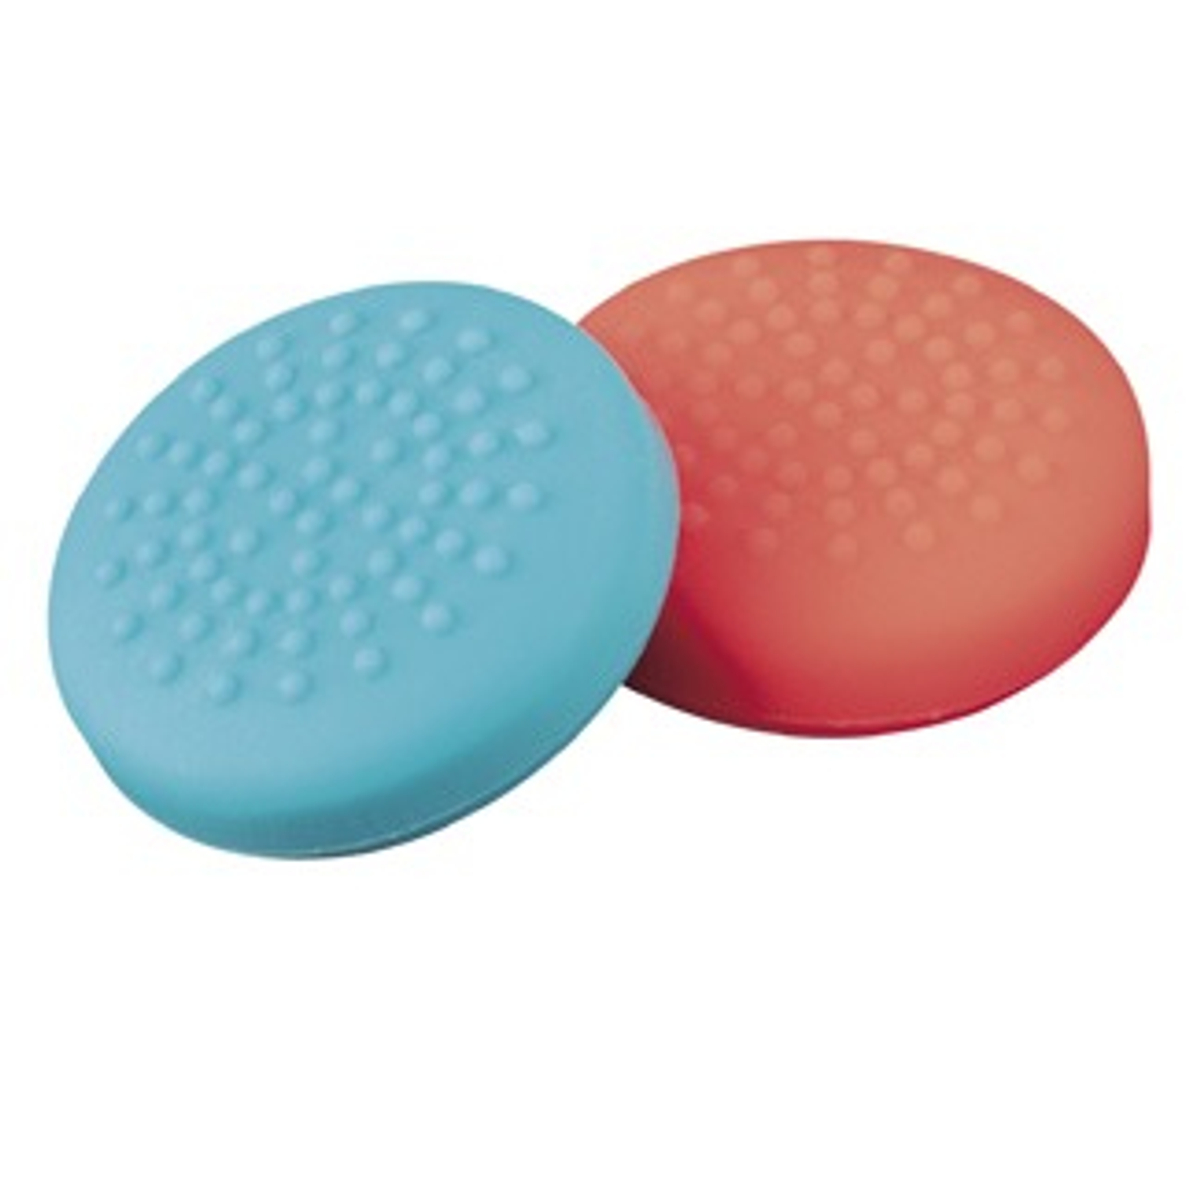 Thumb Grips For Switch Red / Blue